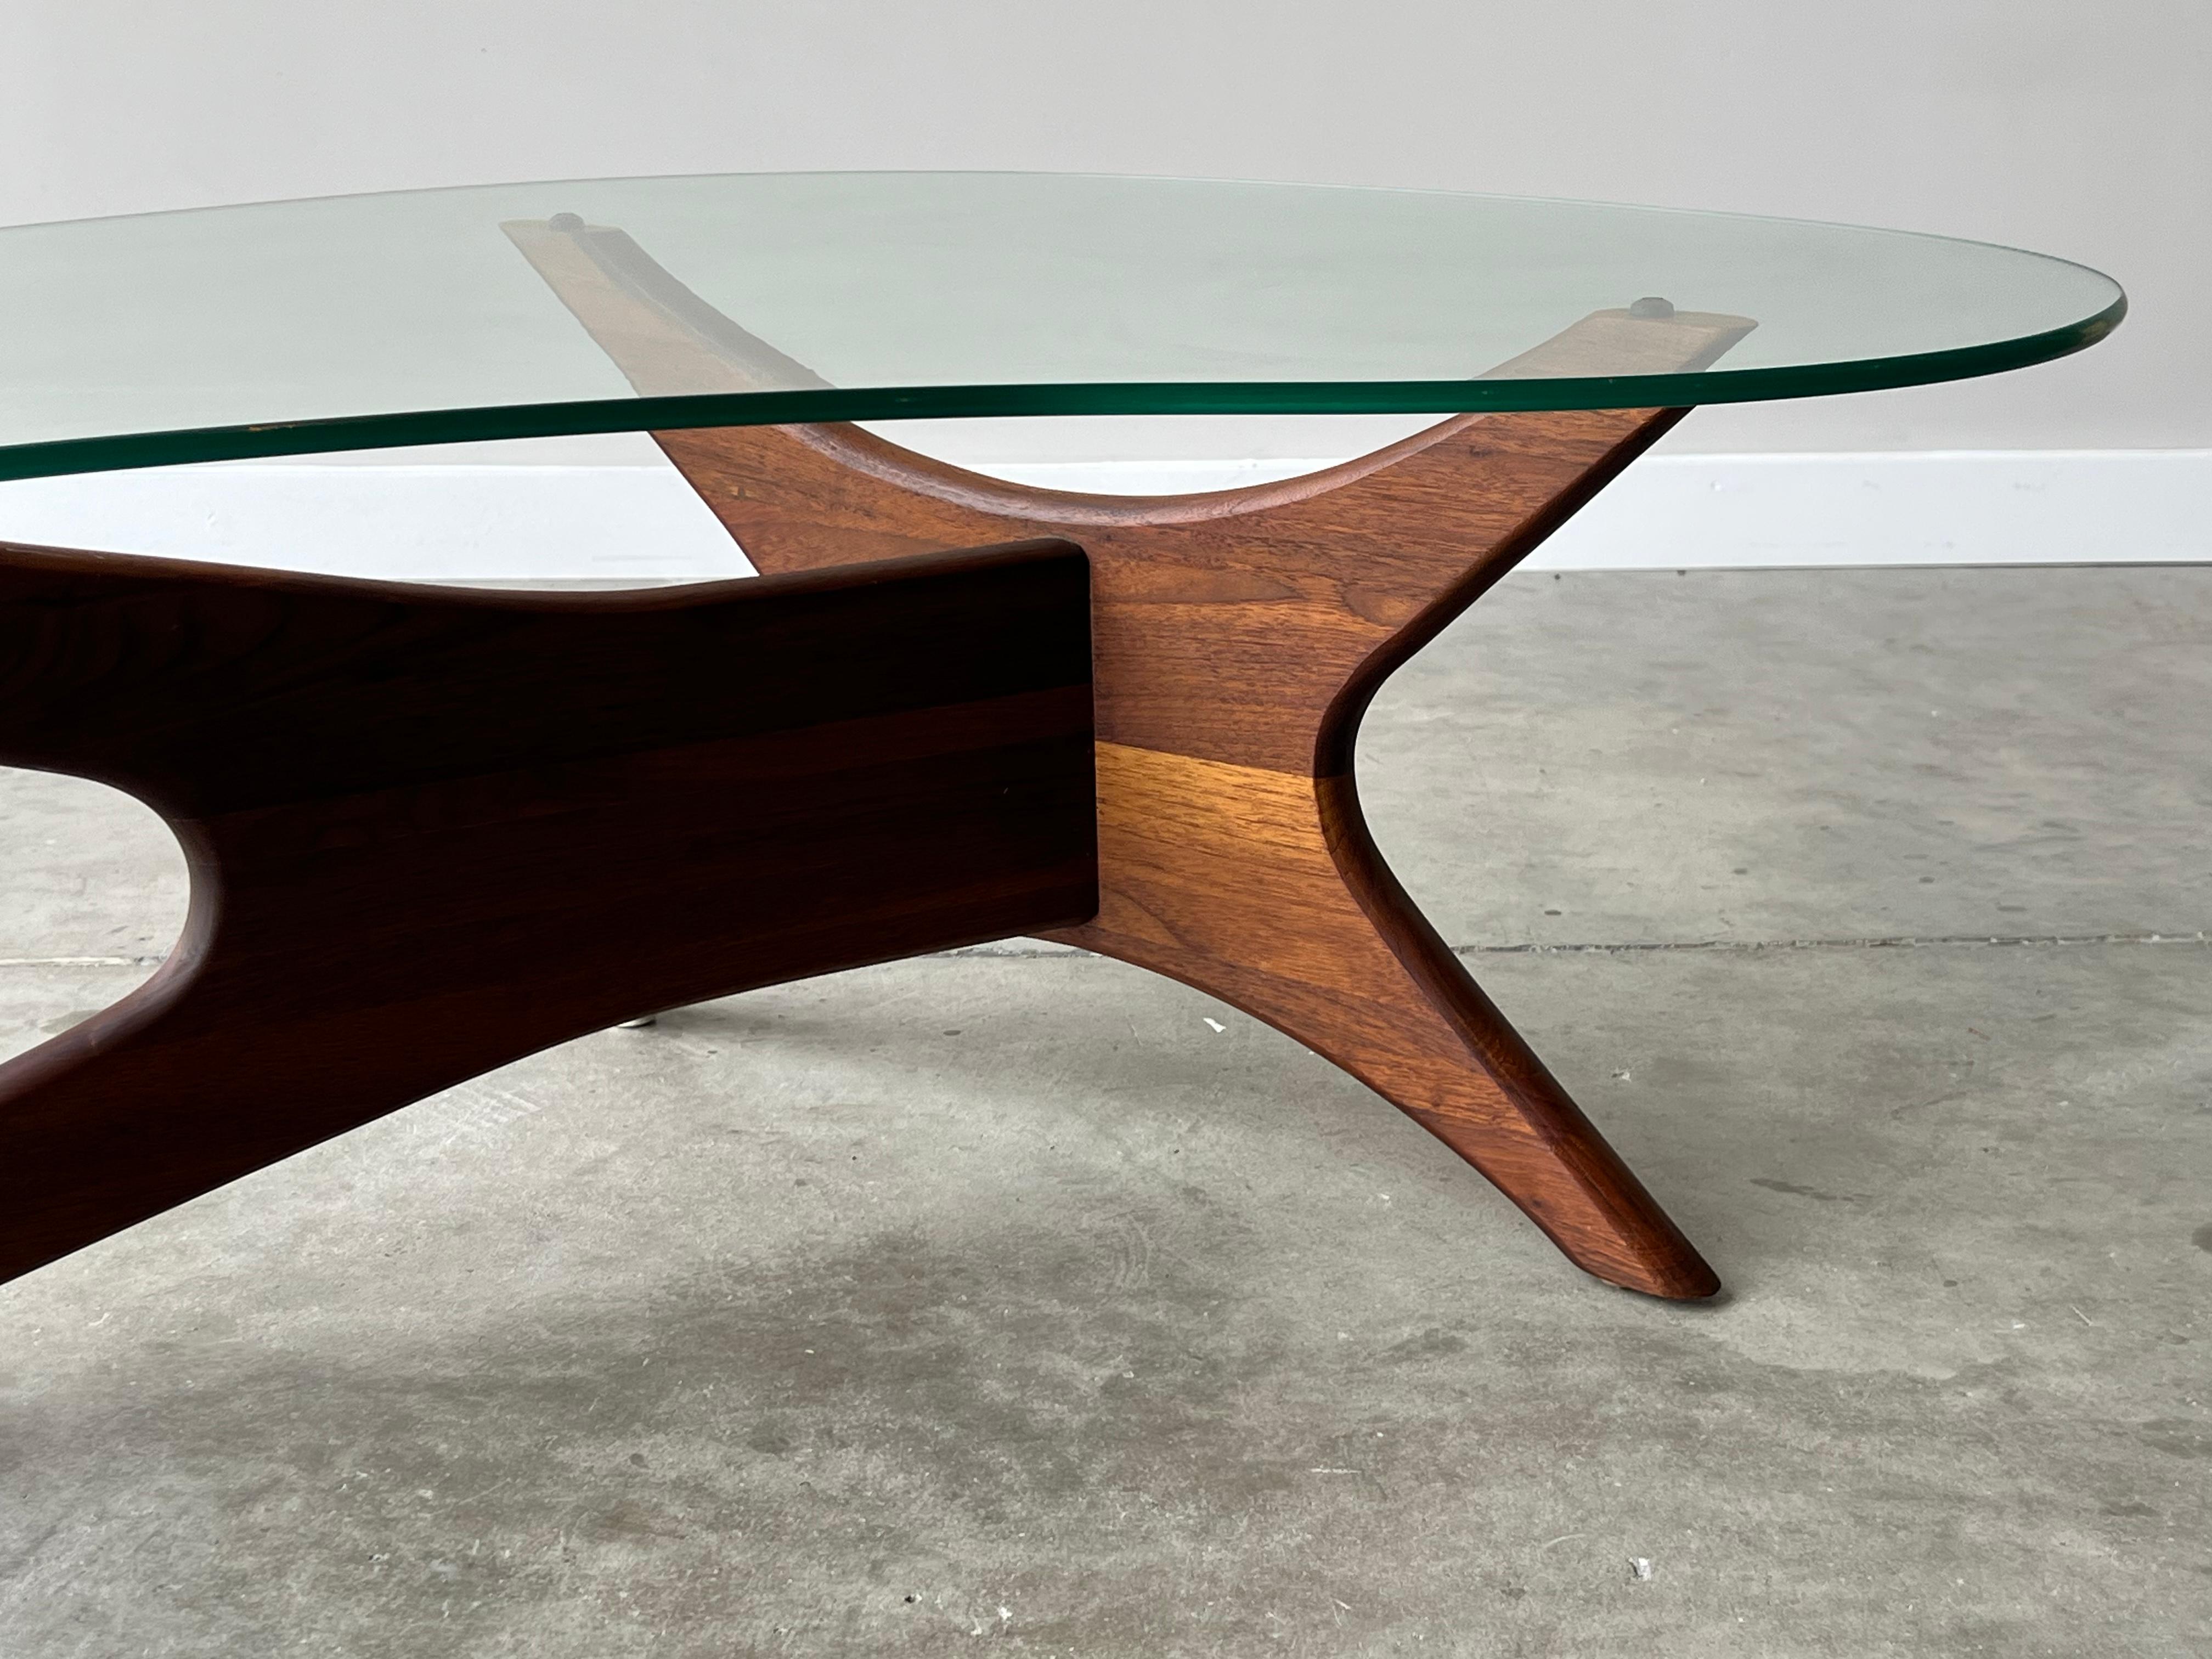 American Mid-Century Modern Adrian Pearsall Sculptral Kidney Coffee Table